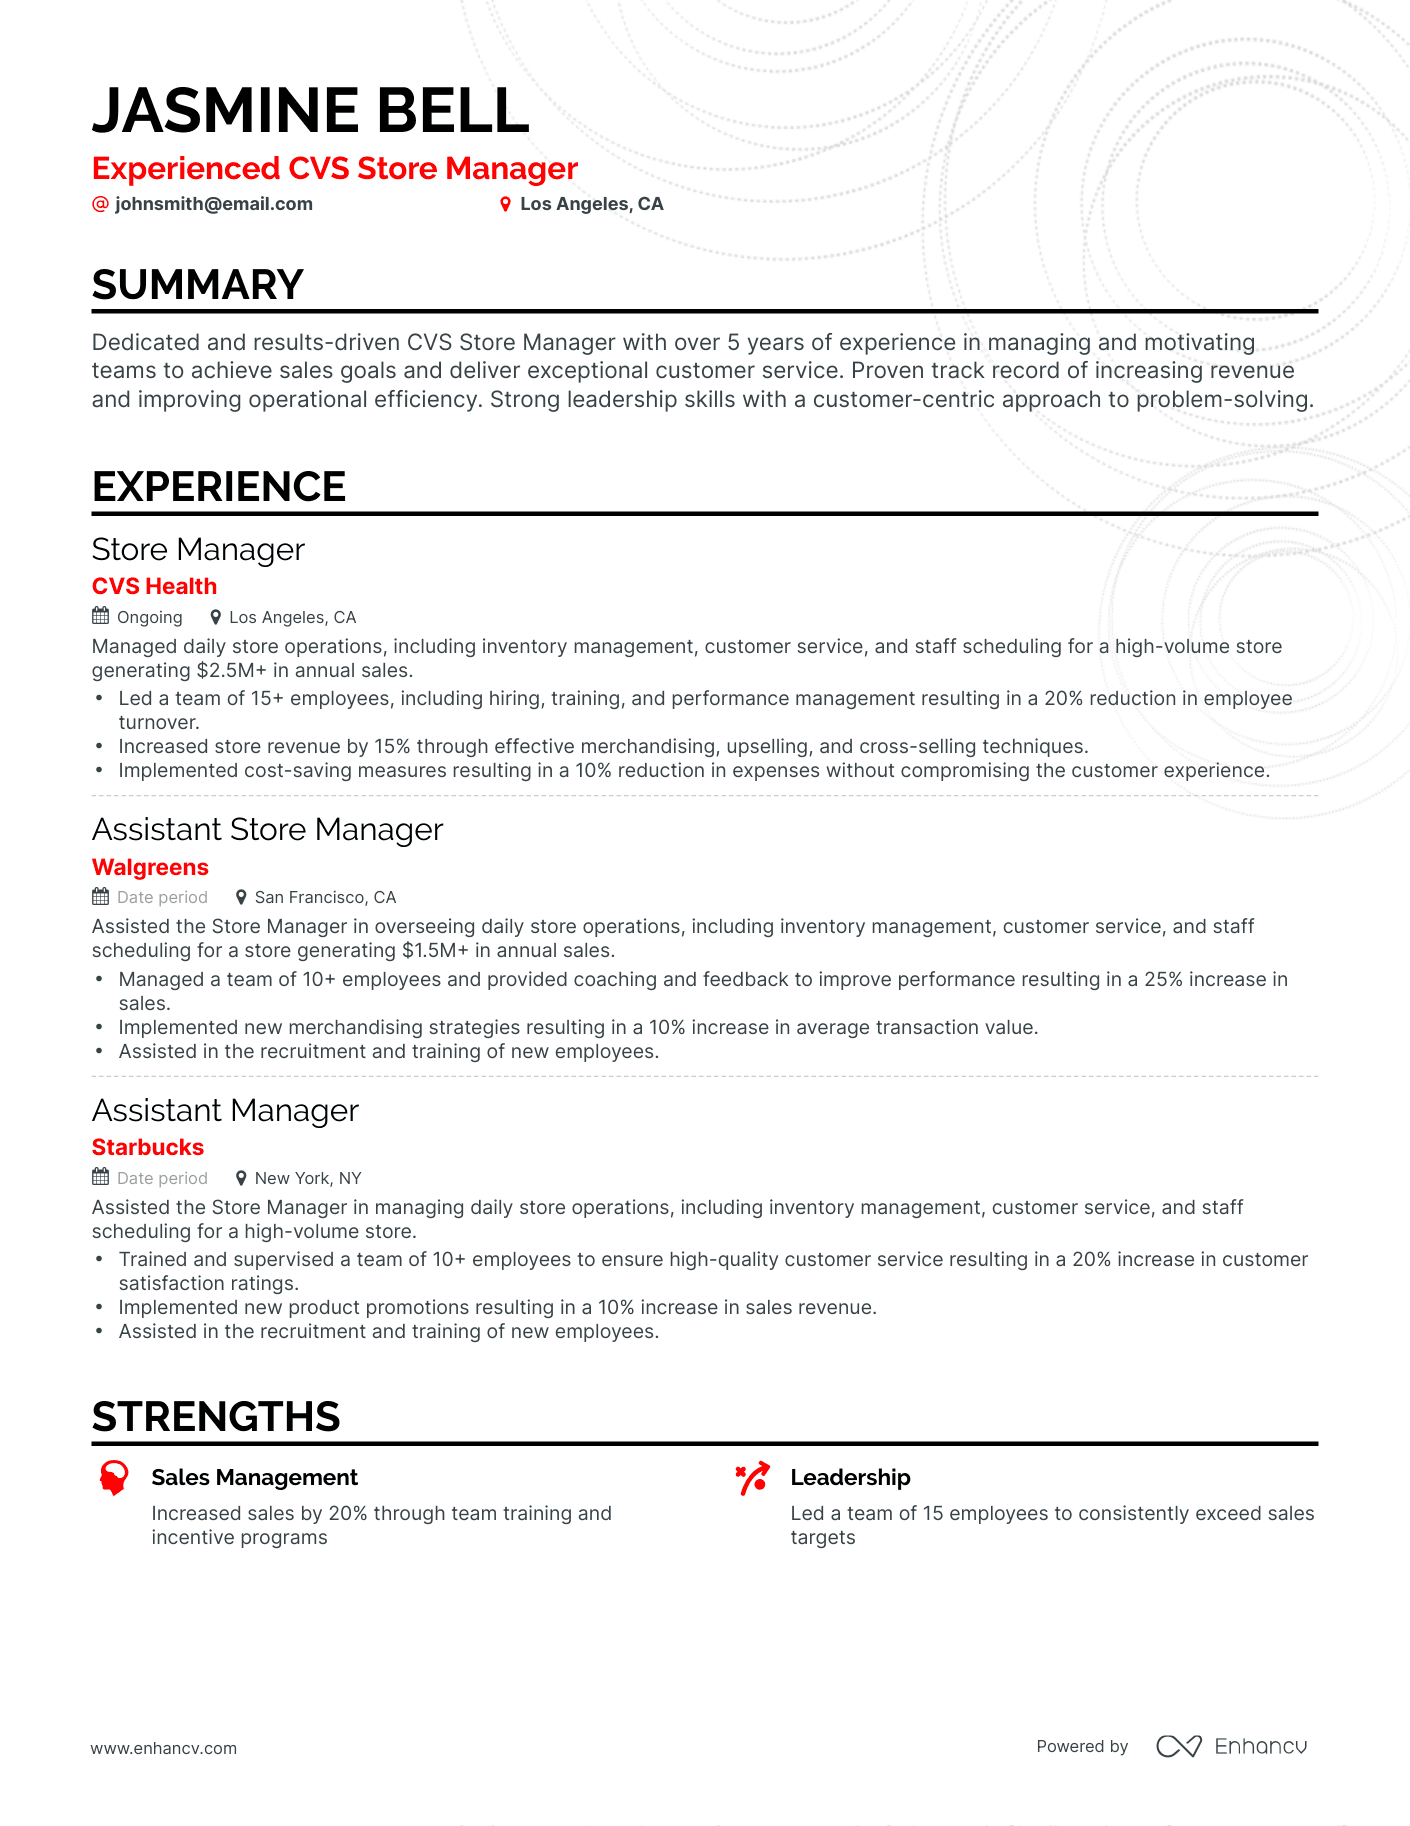 Classic CVS Store Manager Resume Template